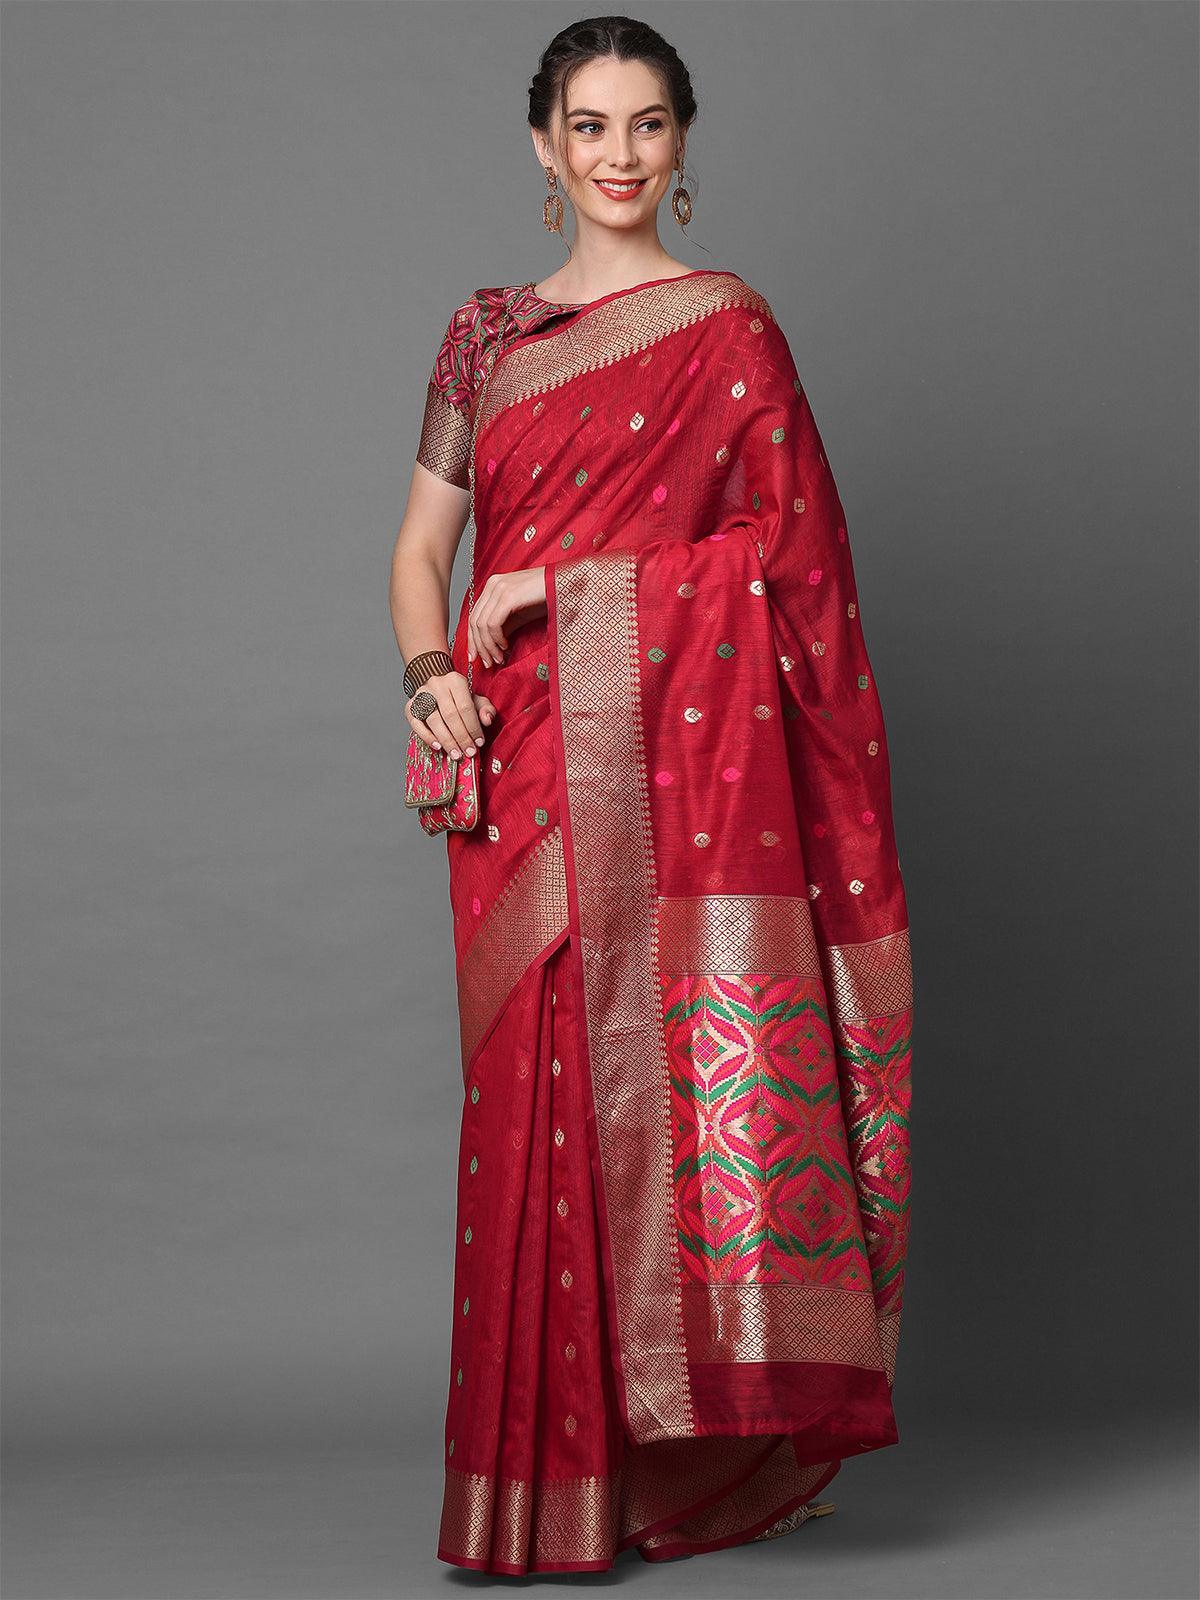 Women's Red Festive Cotton Blend Woven Design Saree With Unstitched Blouse - Odette